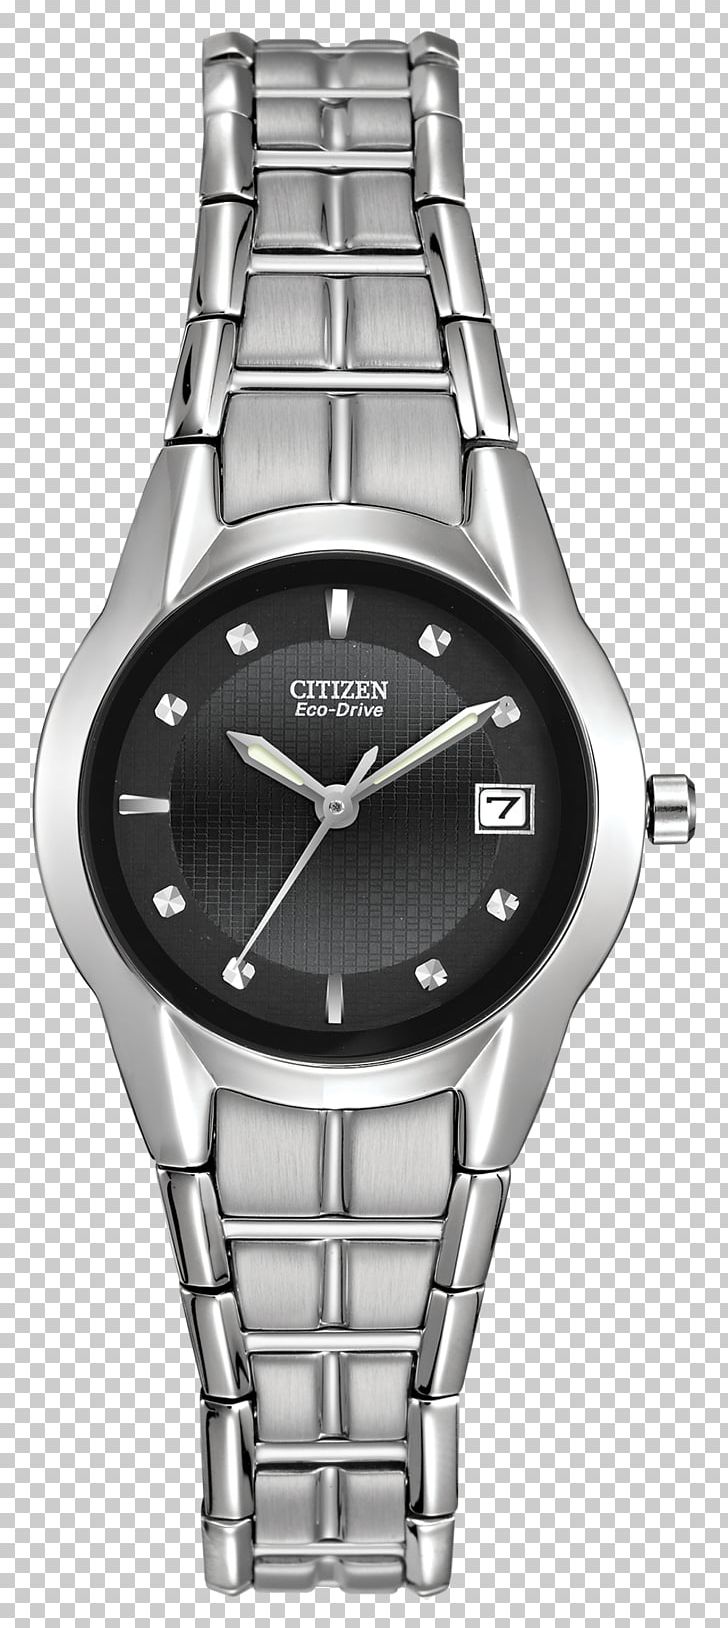 Eco-Drive Watch Citizen Holdings Chronograph Jewellery PNG, Clipart, Accessories, Automatic Watch, Bracelet, Brand, Chronograph Free PNG Download